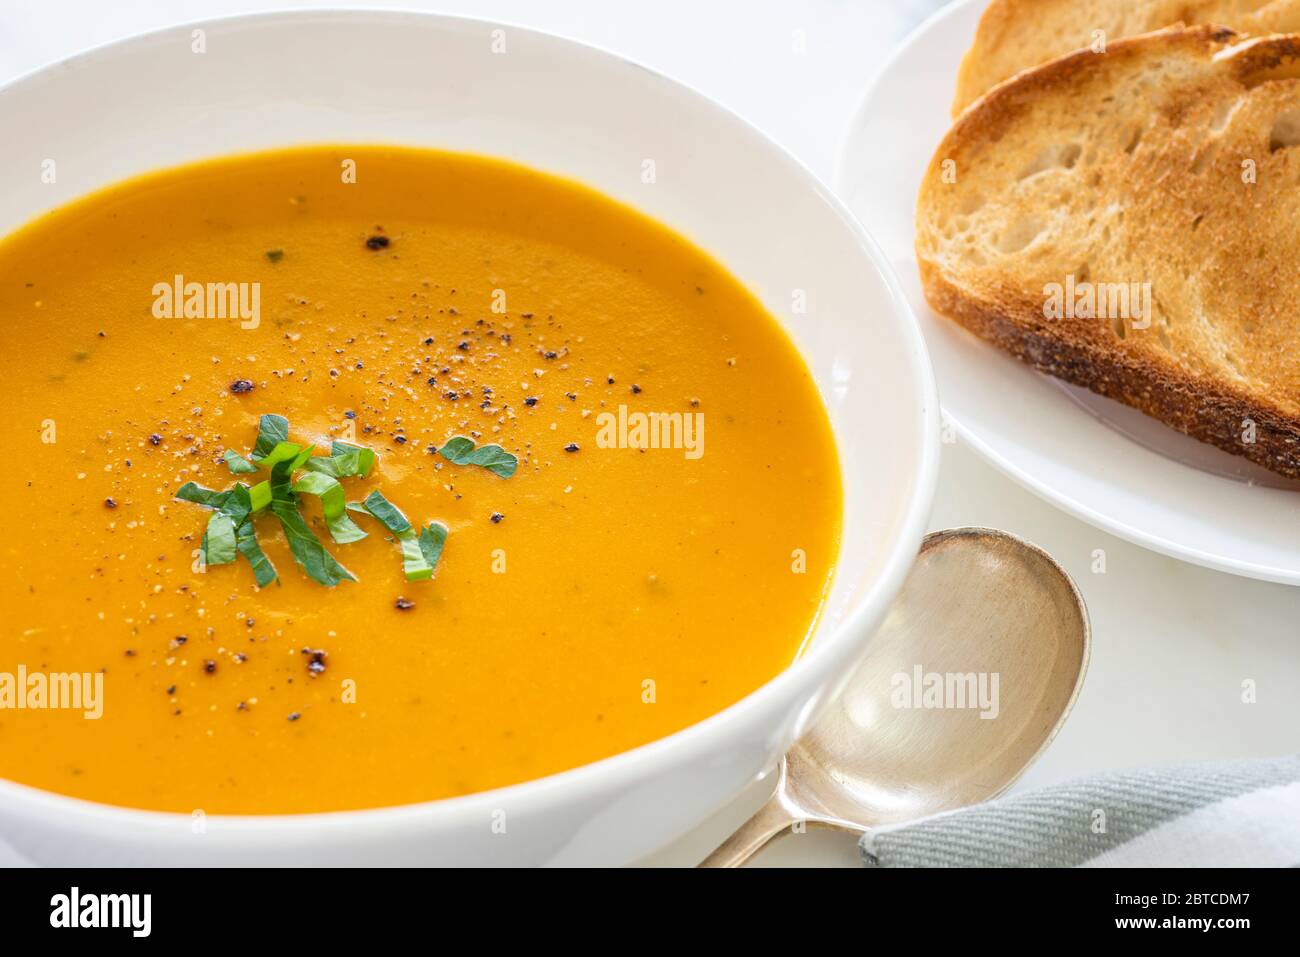 Pumpkin soup in white bowl with toasted bread on the side Stock Photo